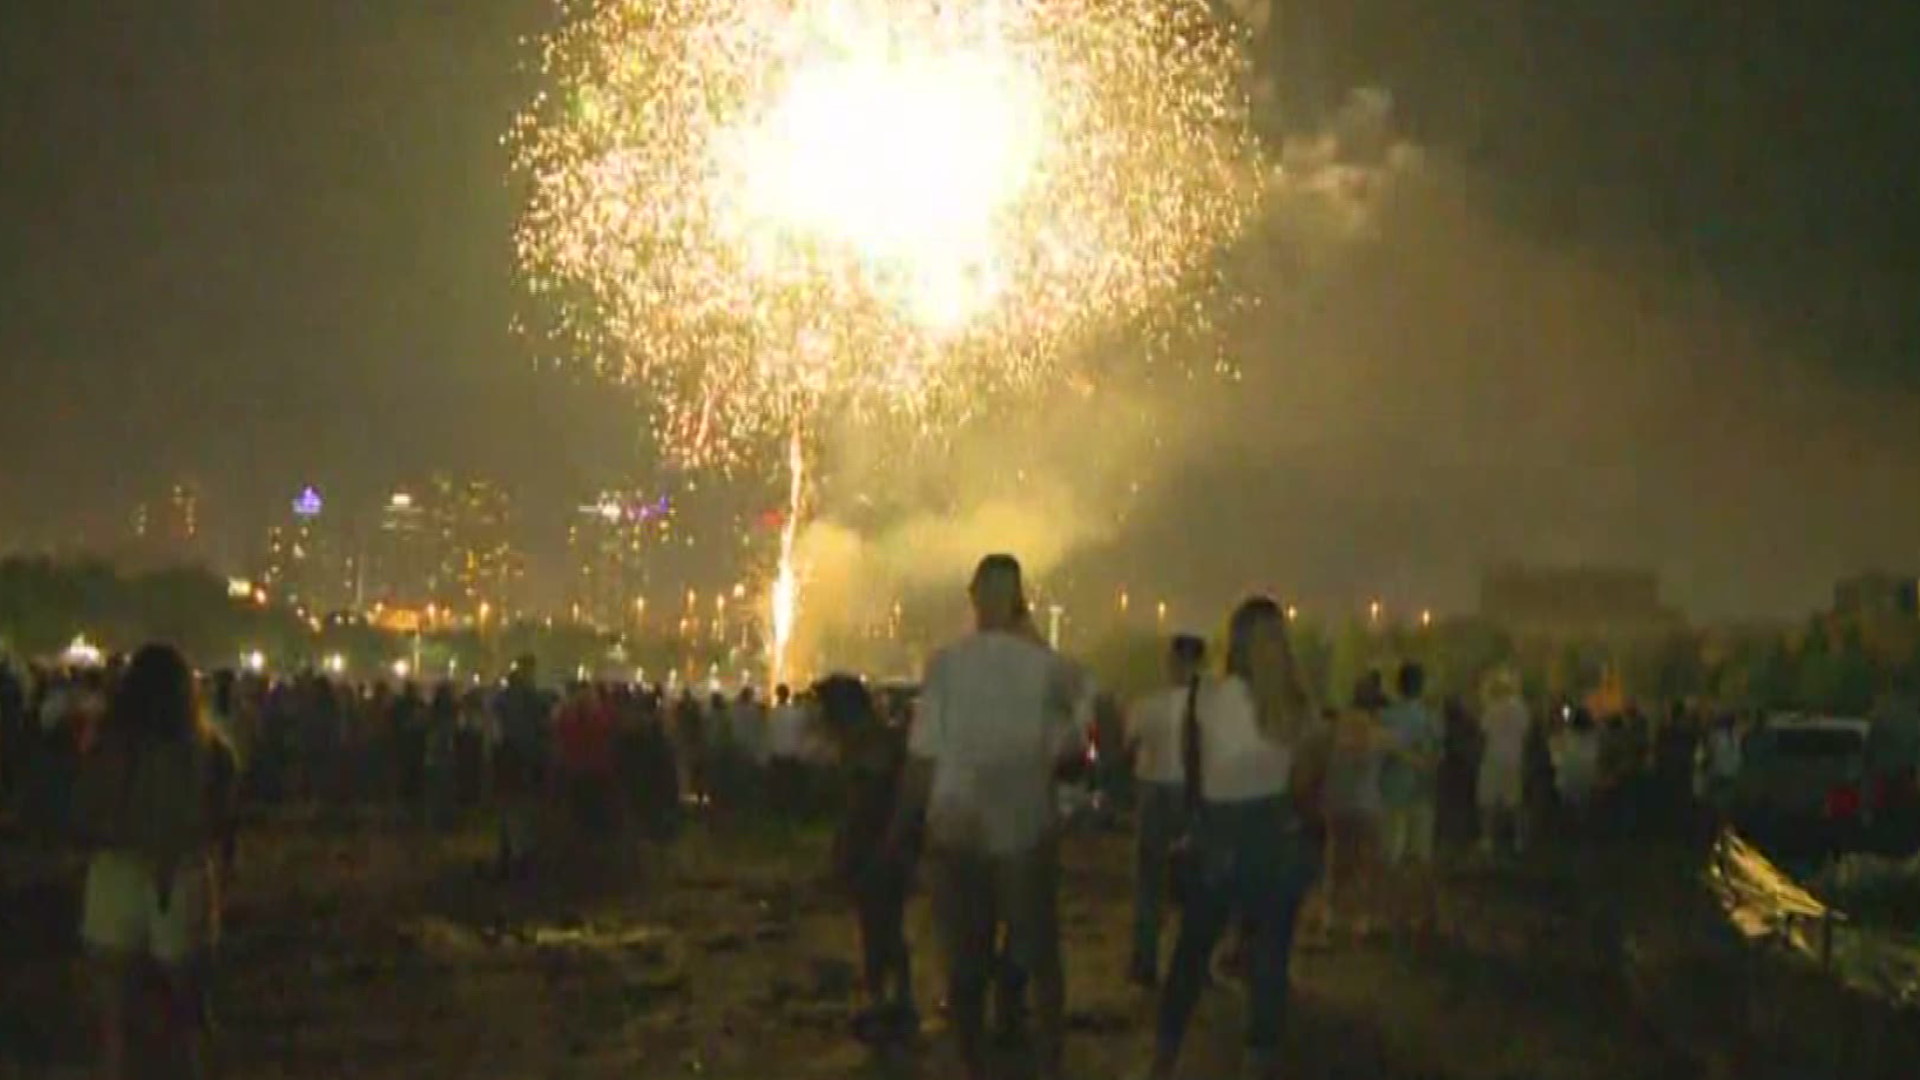 After last year's fireworks shows fizzled, some were worried about this year's events. But those who went to the first Boom by the Bay were dazzled by the Riverwalk extravaganza.